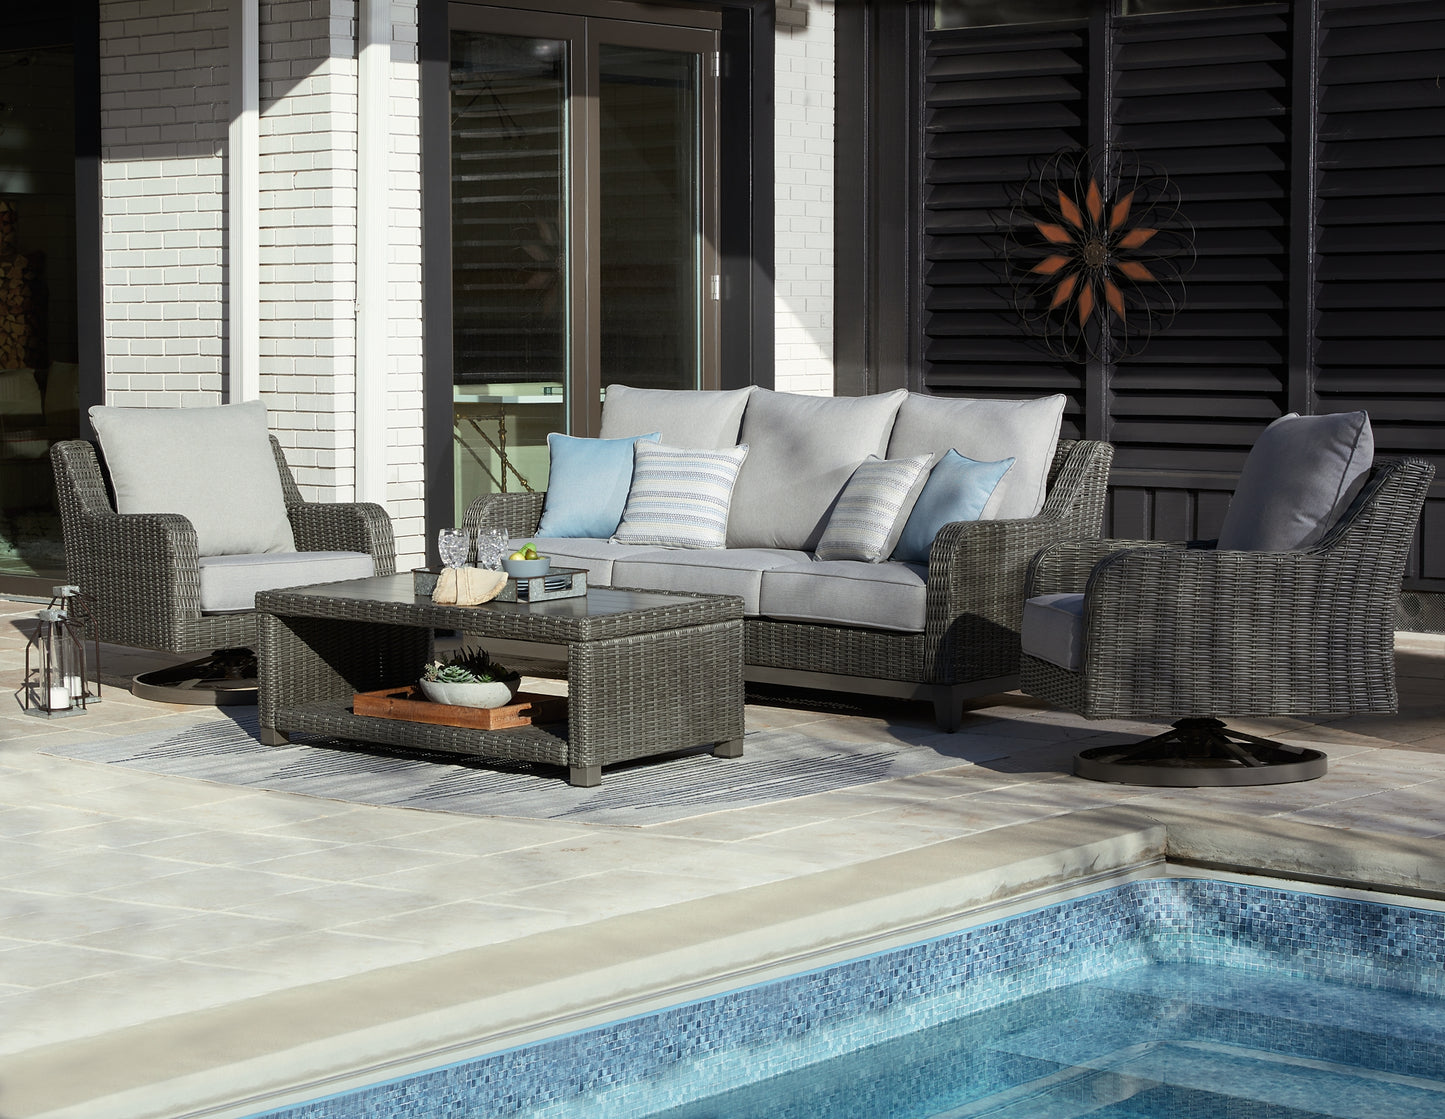 Elite Park Outdoor Sofa and 2 Chairs with Coffee Table Signature Design by Ashley®